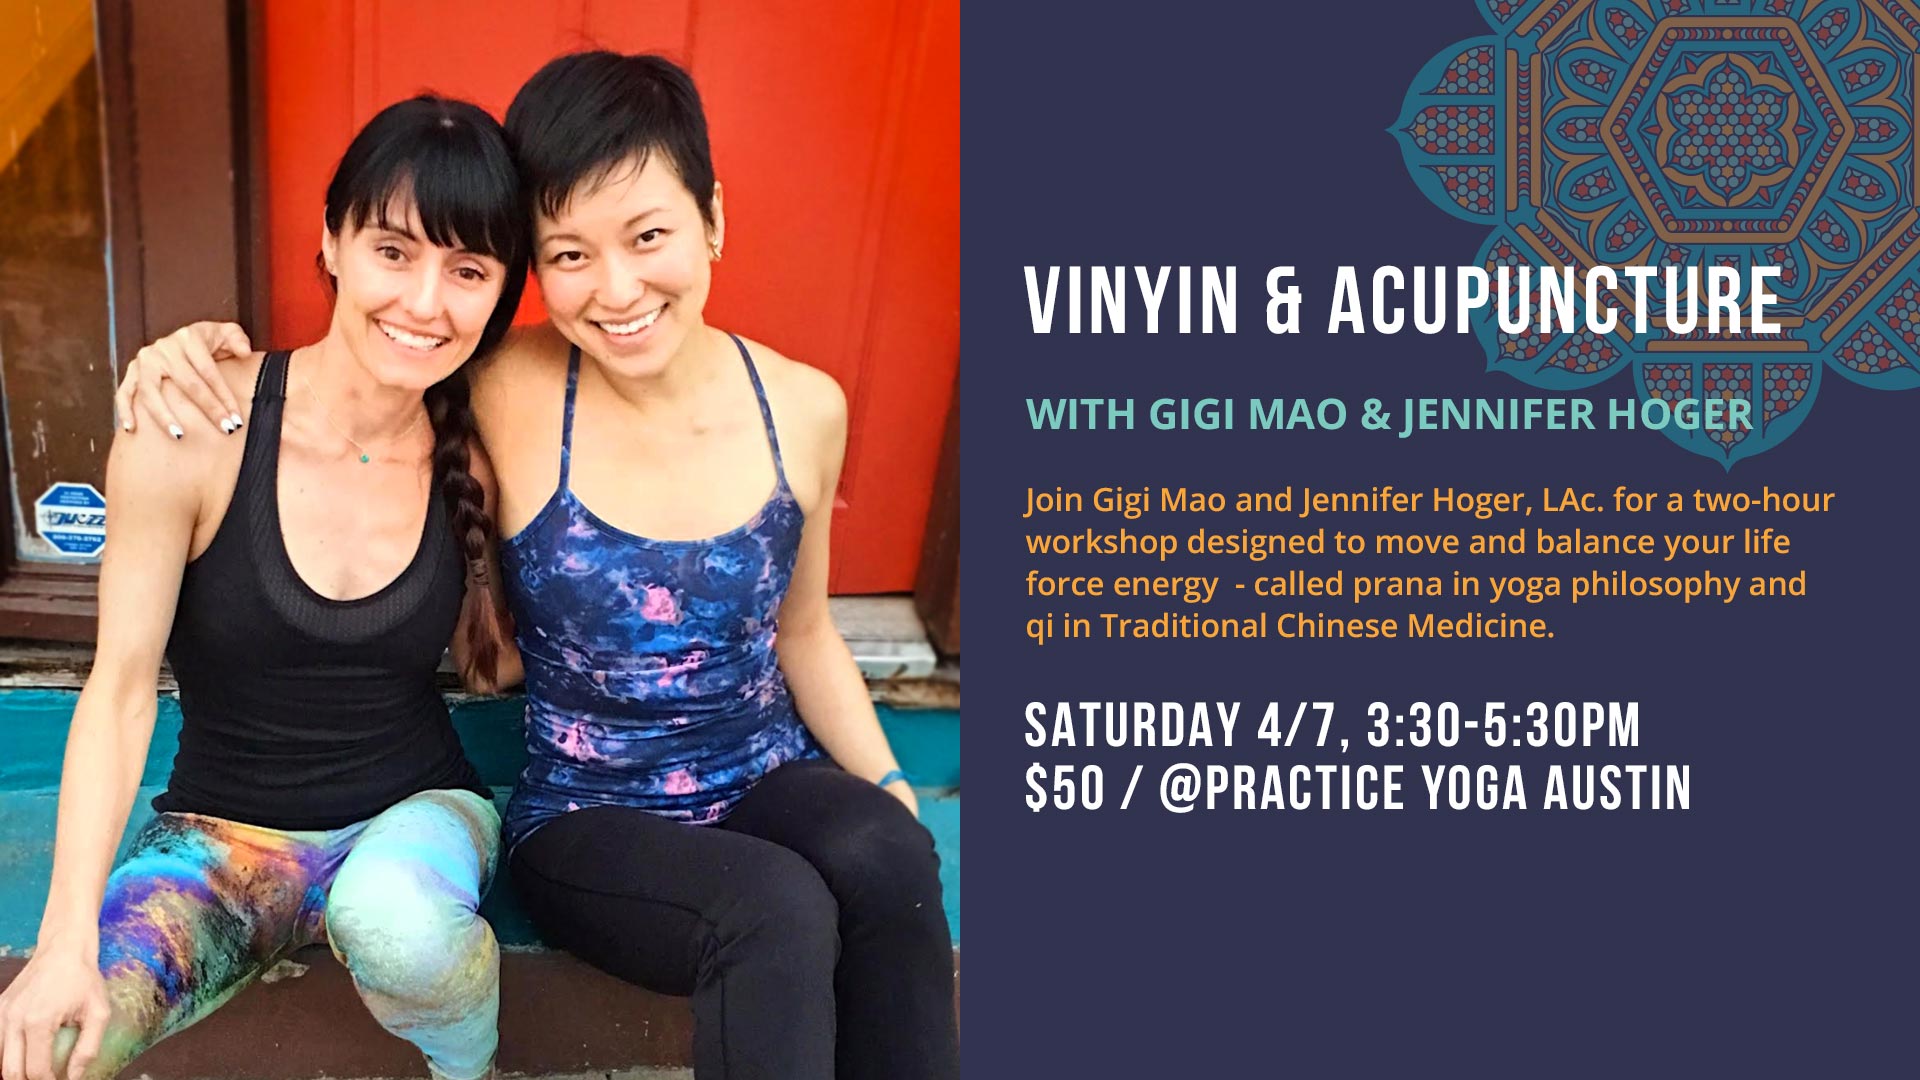 Vin Yin and Acupuncture with Gigi Mao and Jennifer hoger